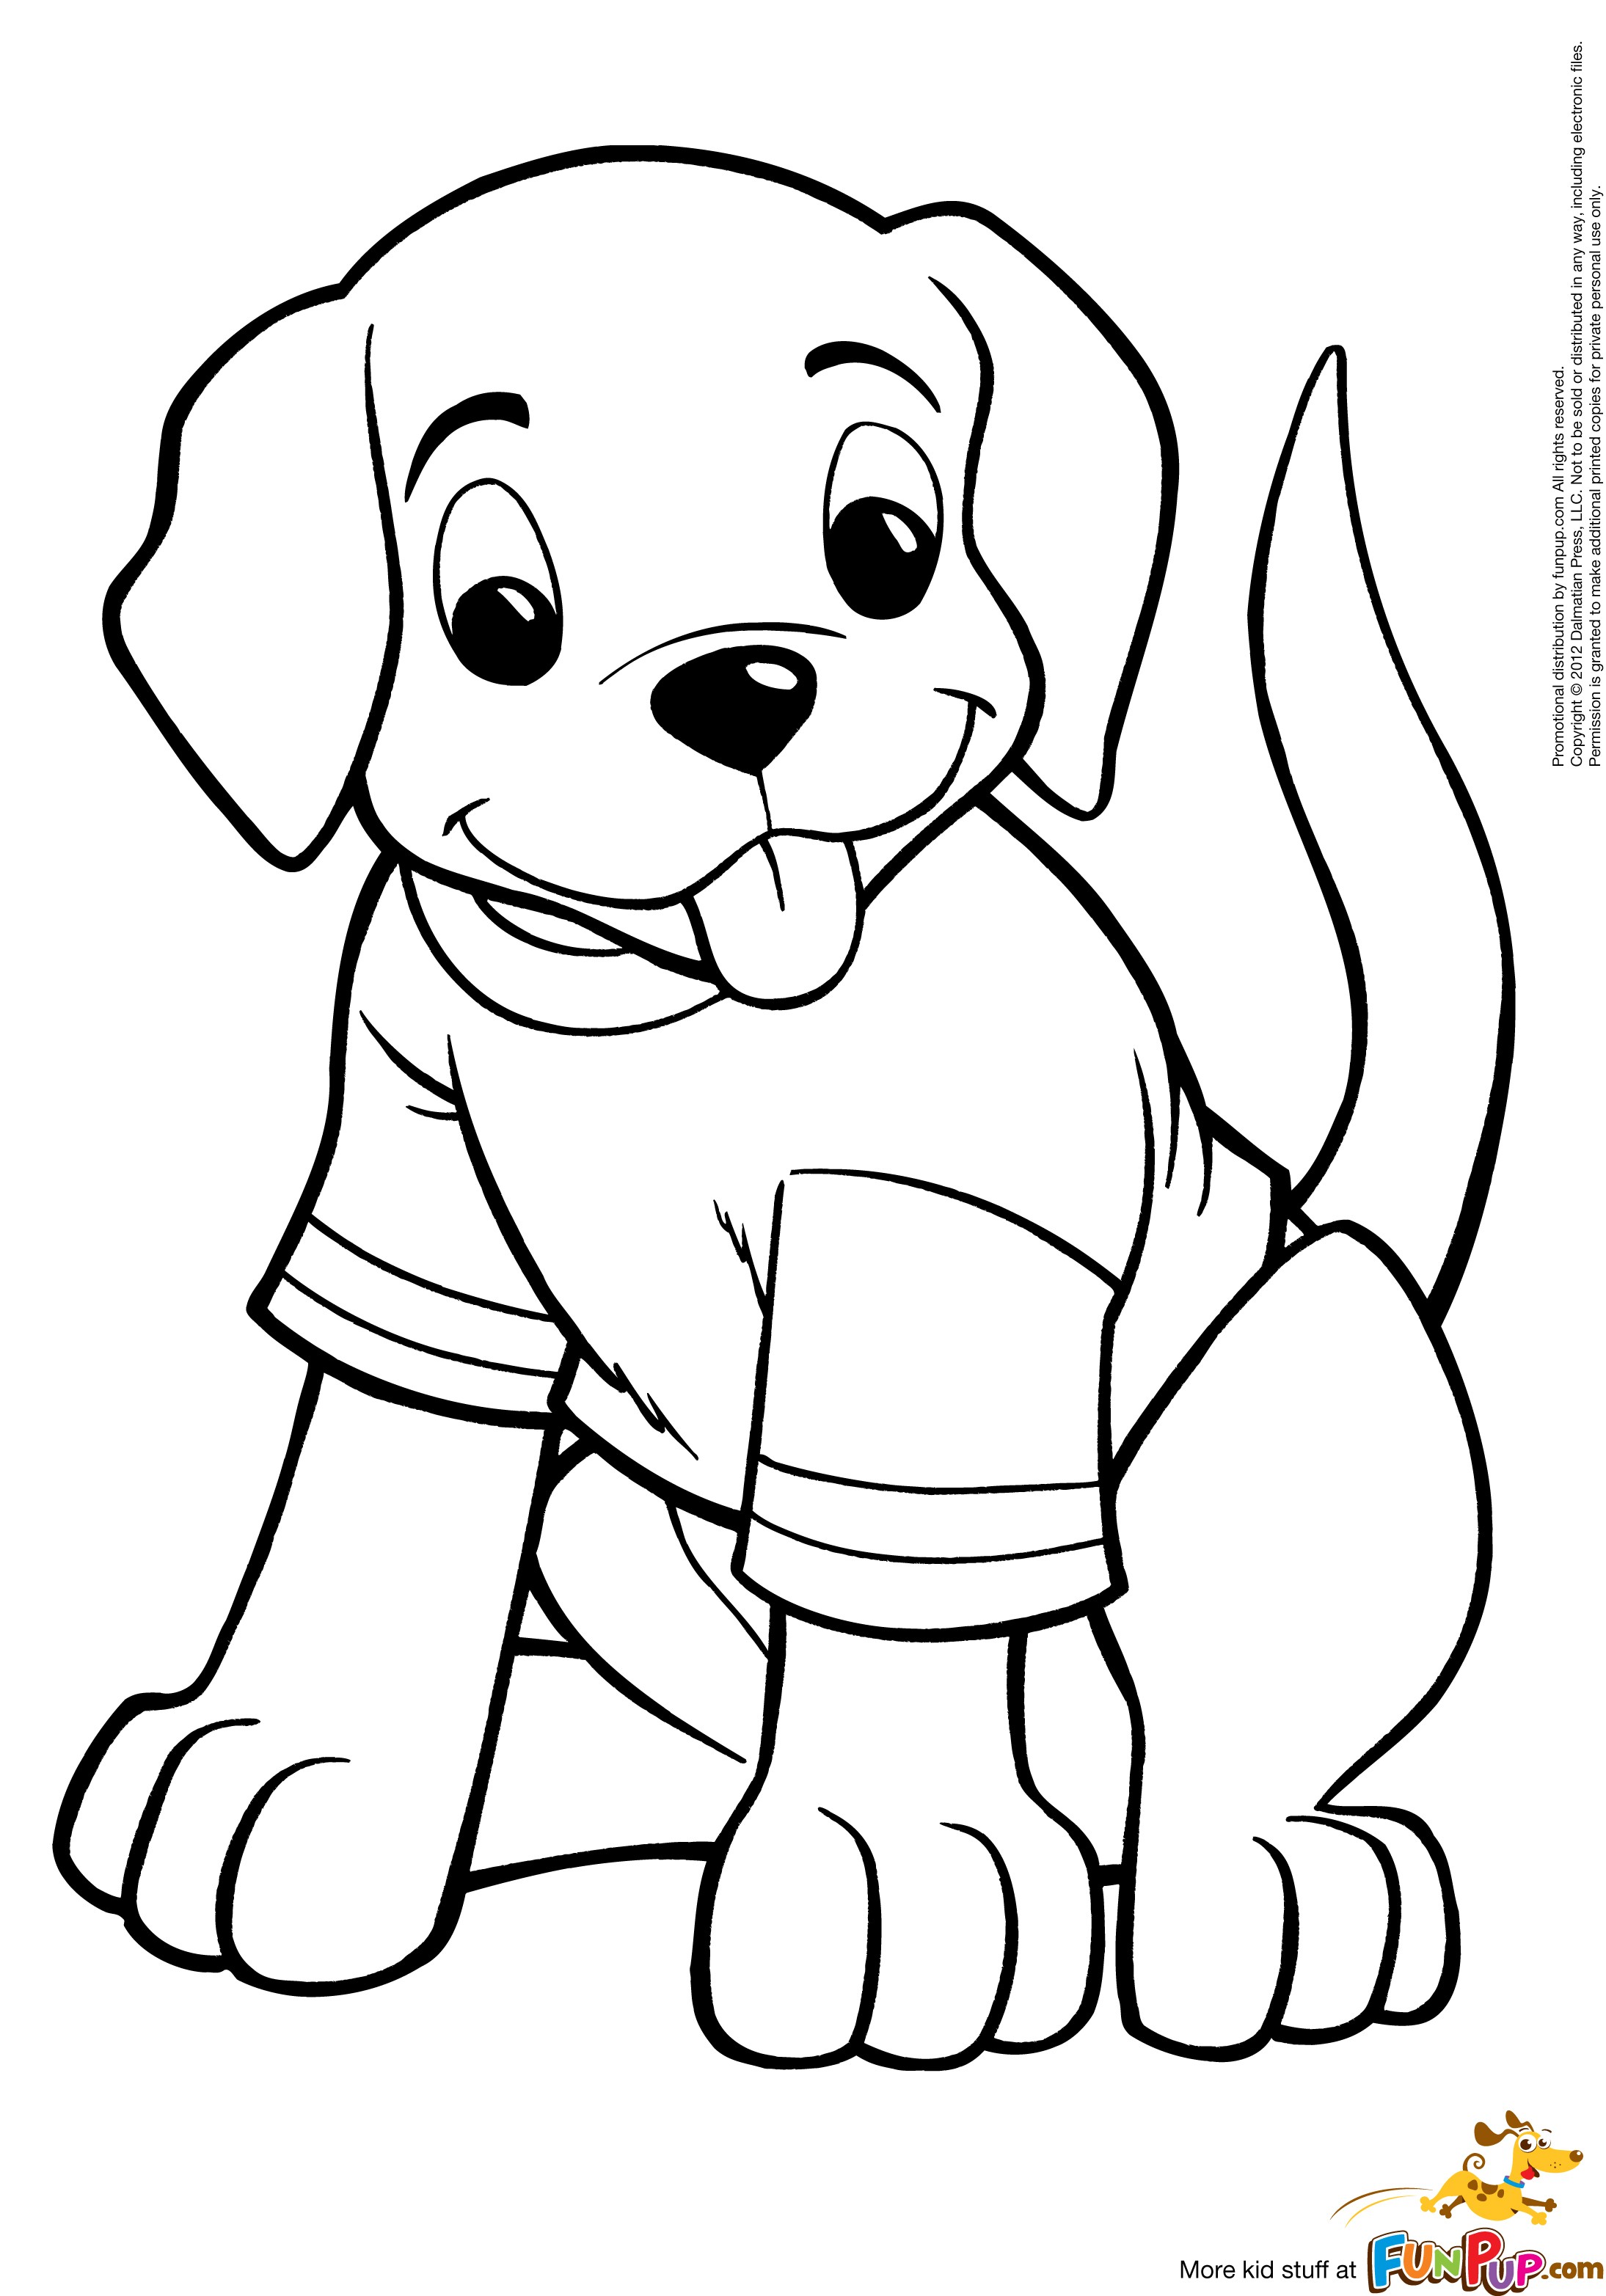 Puppies Coloring Pages with PUPPY COLORING PAGES Coloring Pages ...